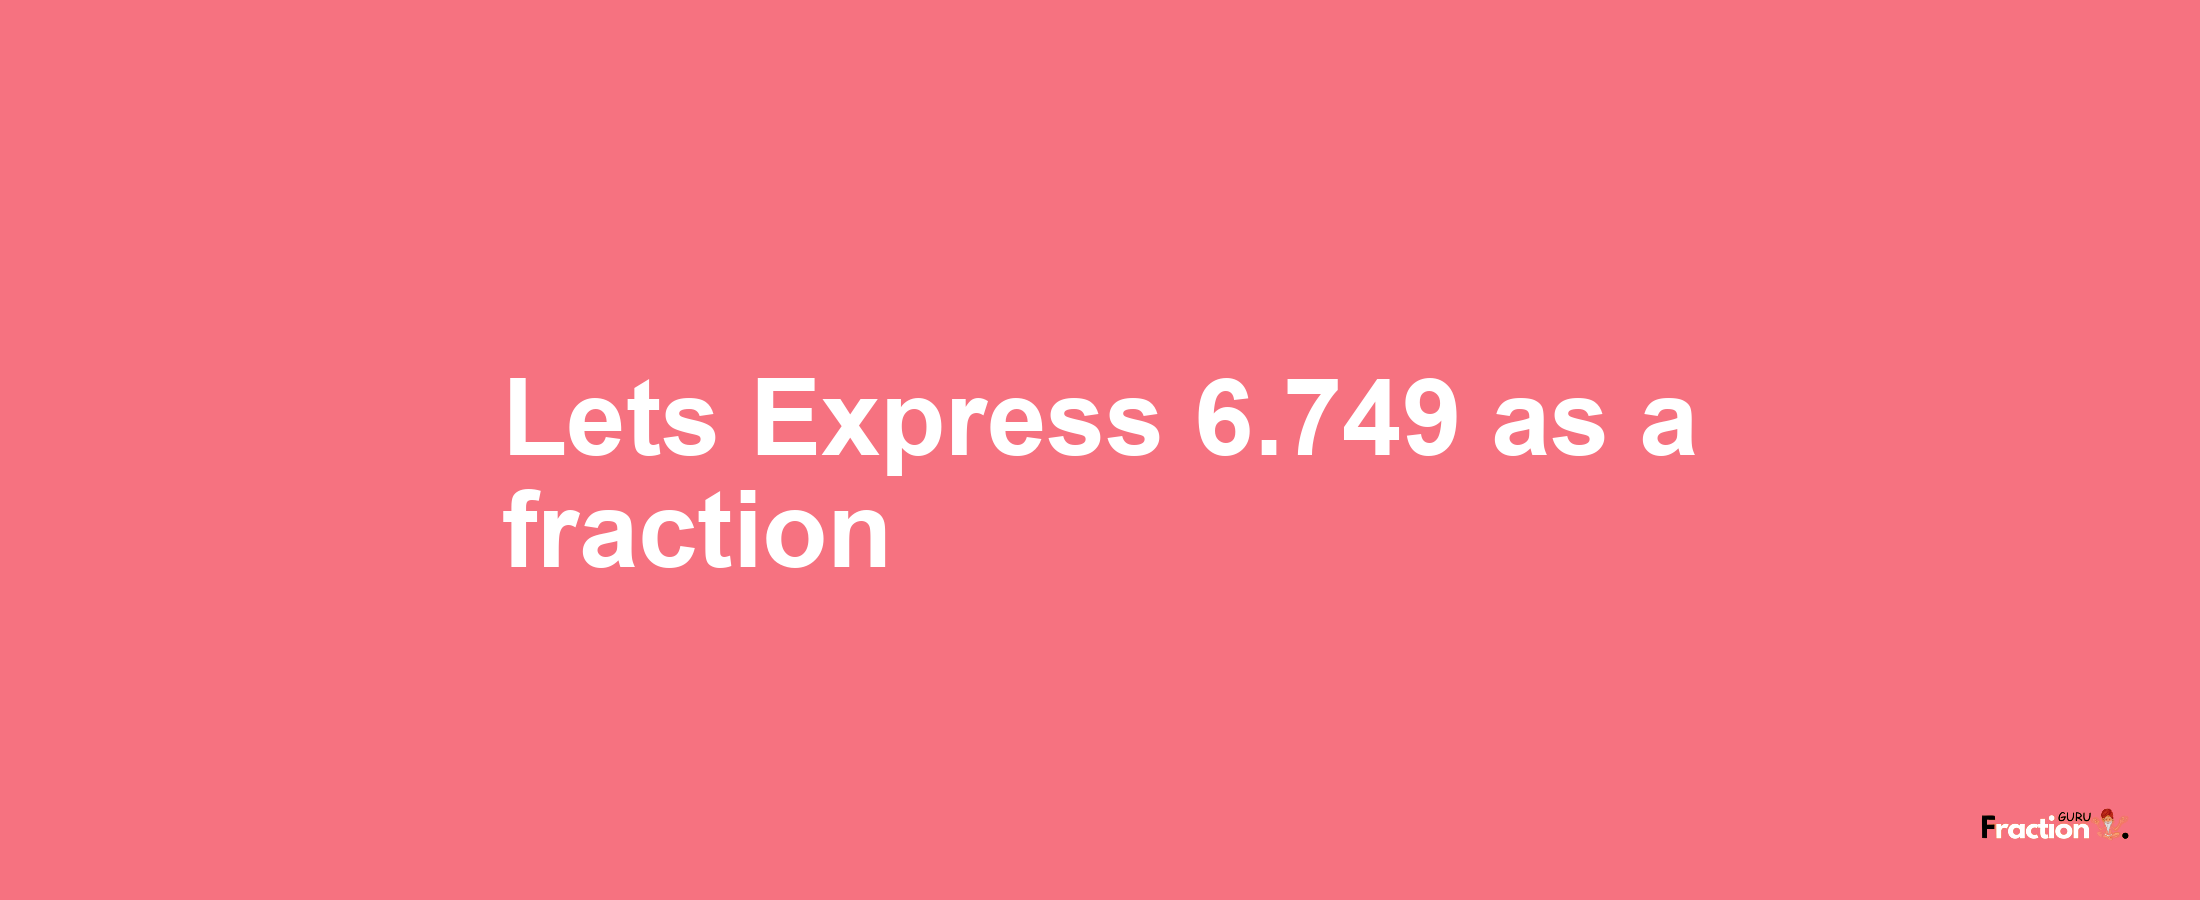 Lets Express 6.749 as afraction